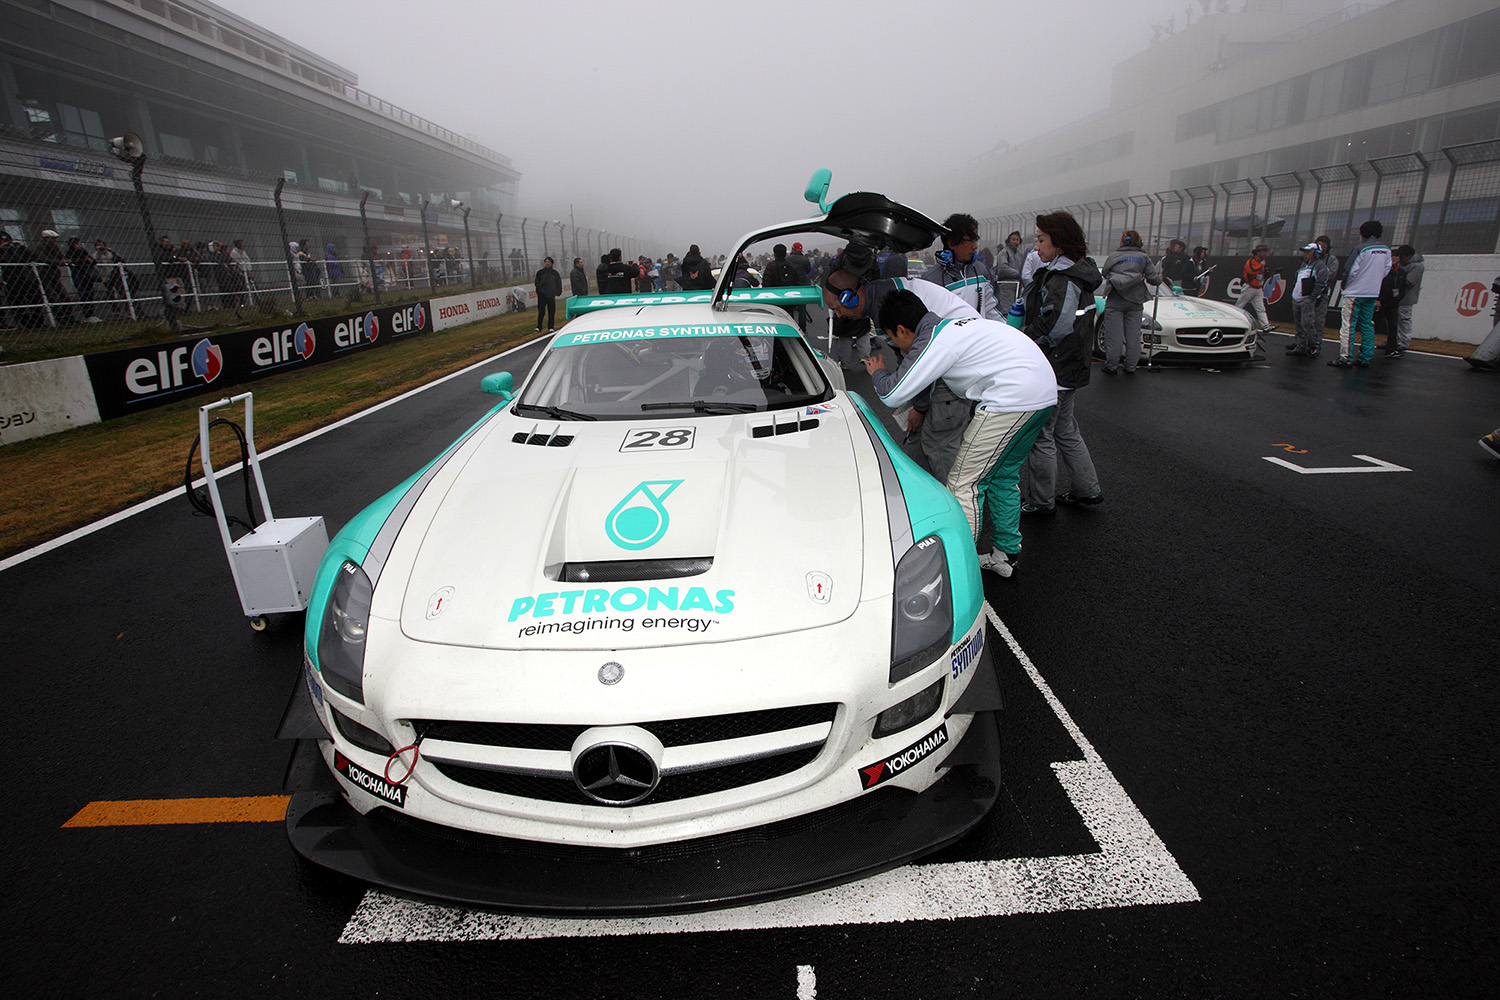 Lester finishes second in 2012 Super Taikyu Endurance Series